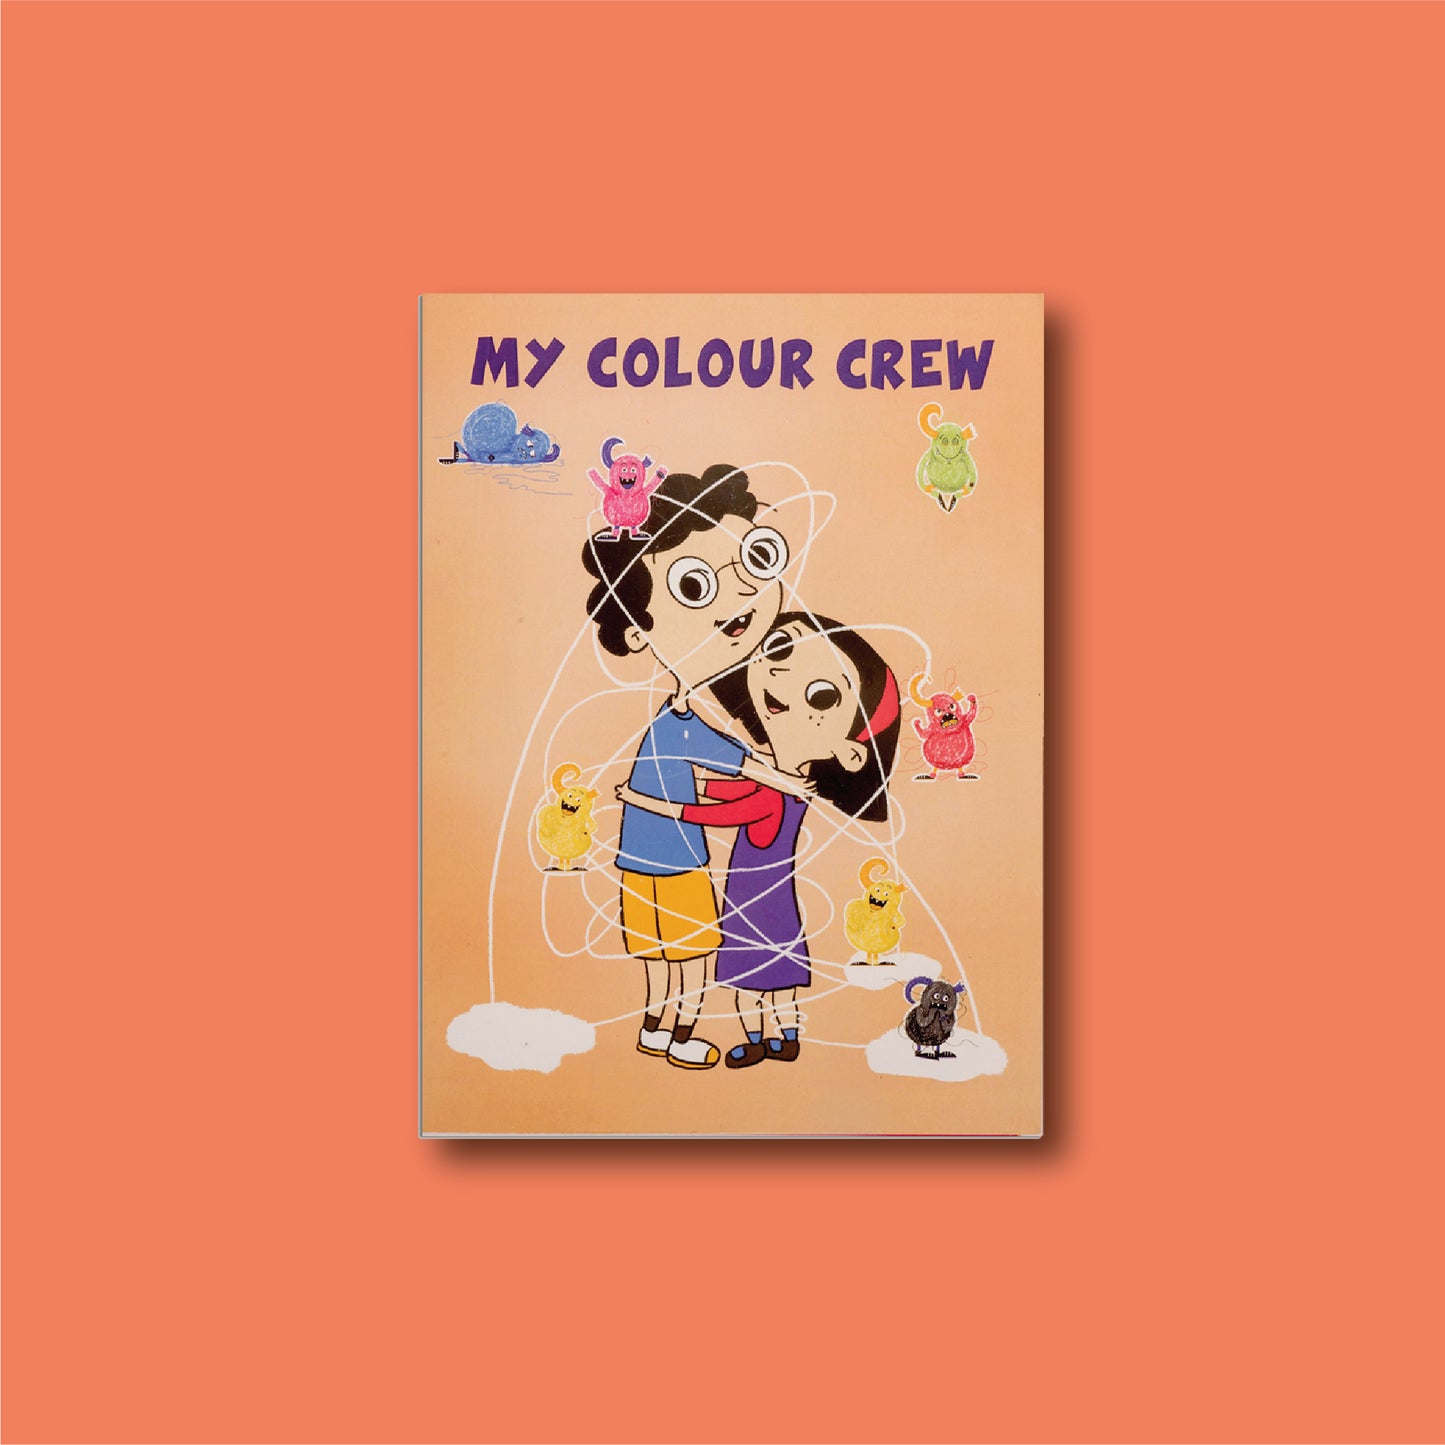 My Colour Crew: Fold Out Book on Emotions & Colours